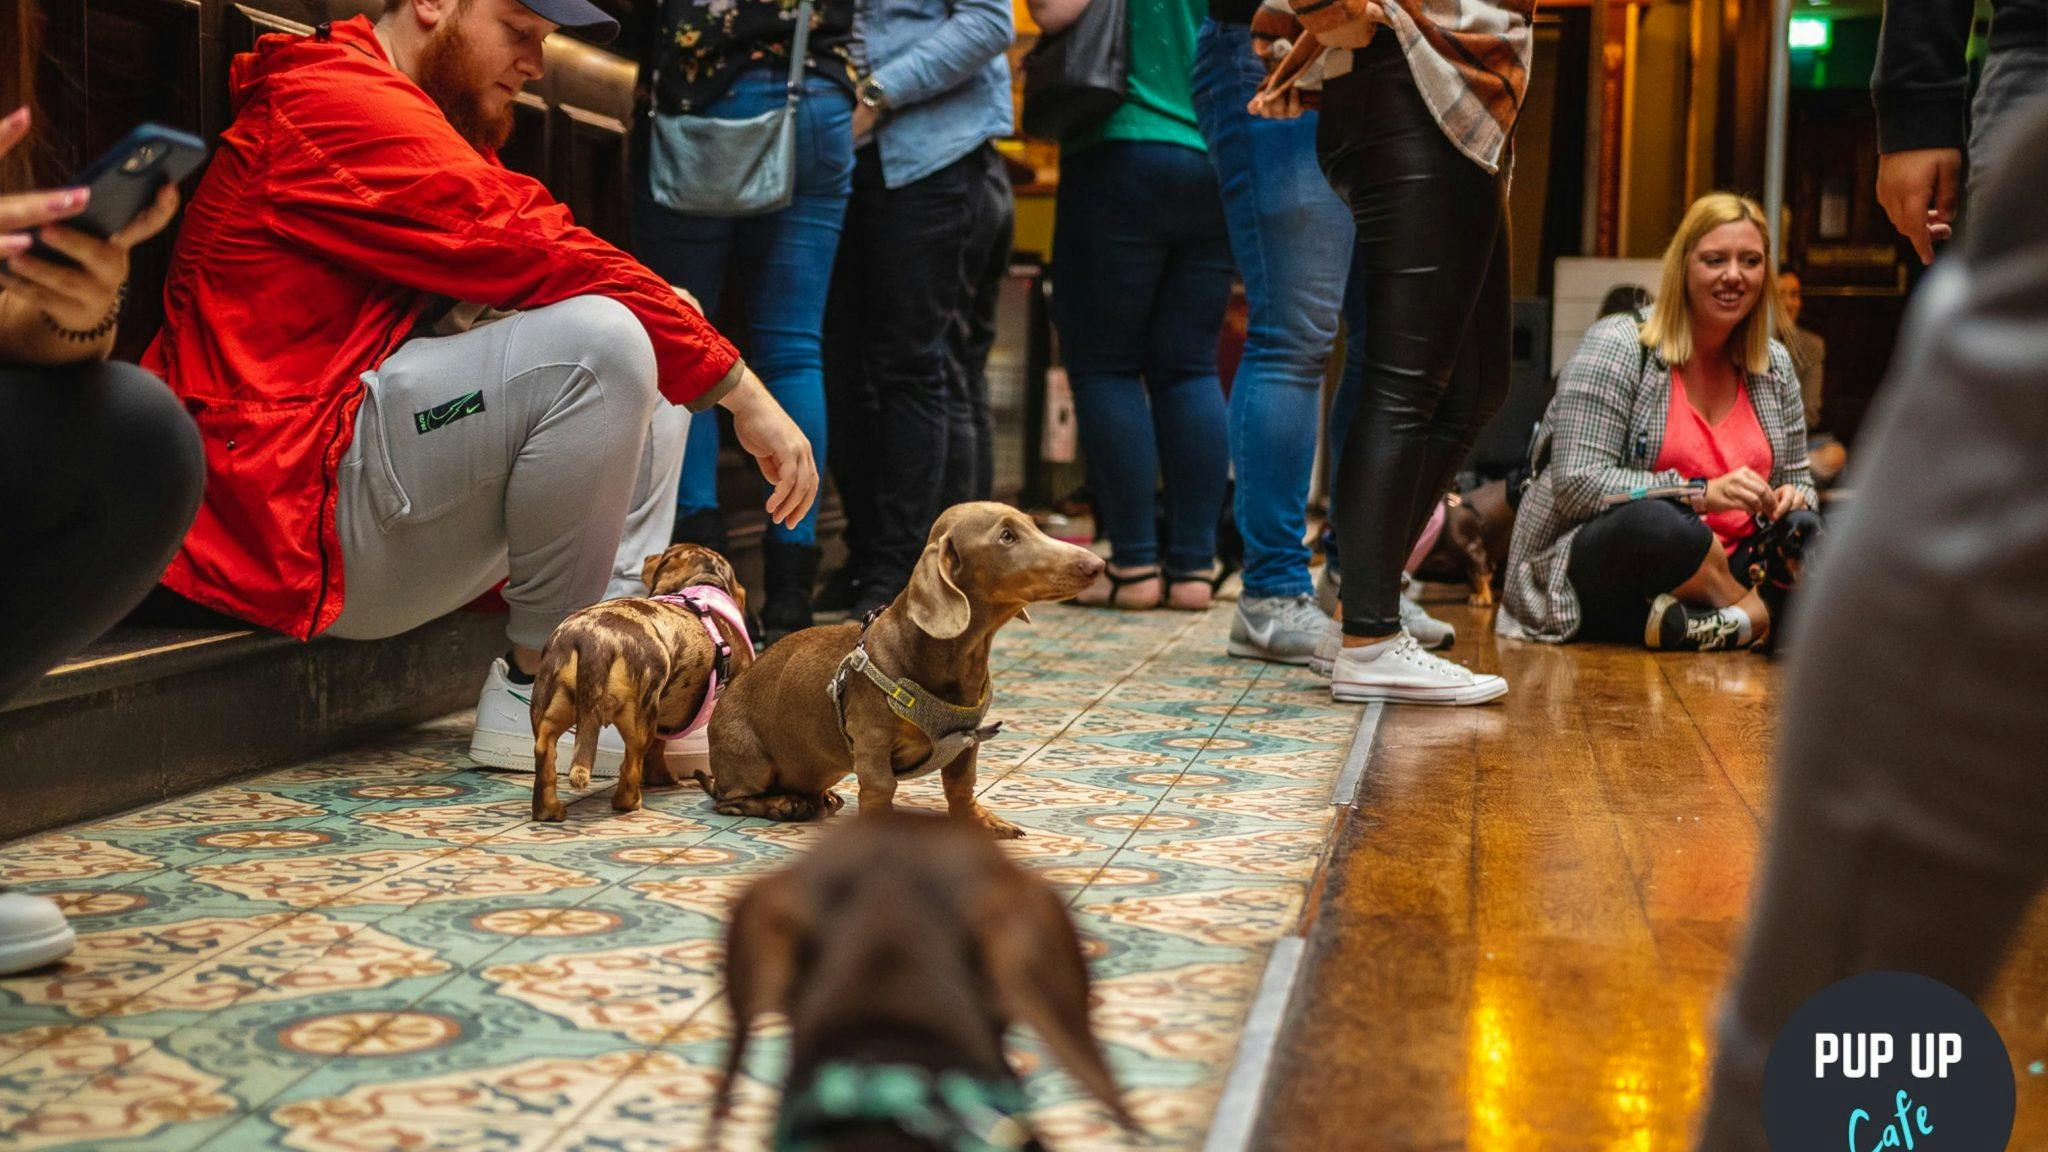 The Pup Up Cafe is back in Leeds this weekend!